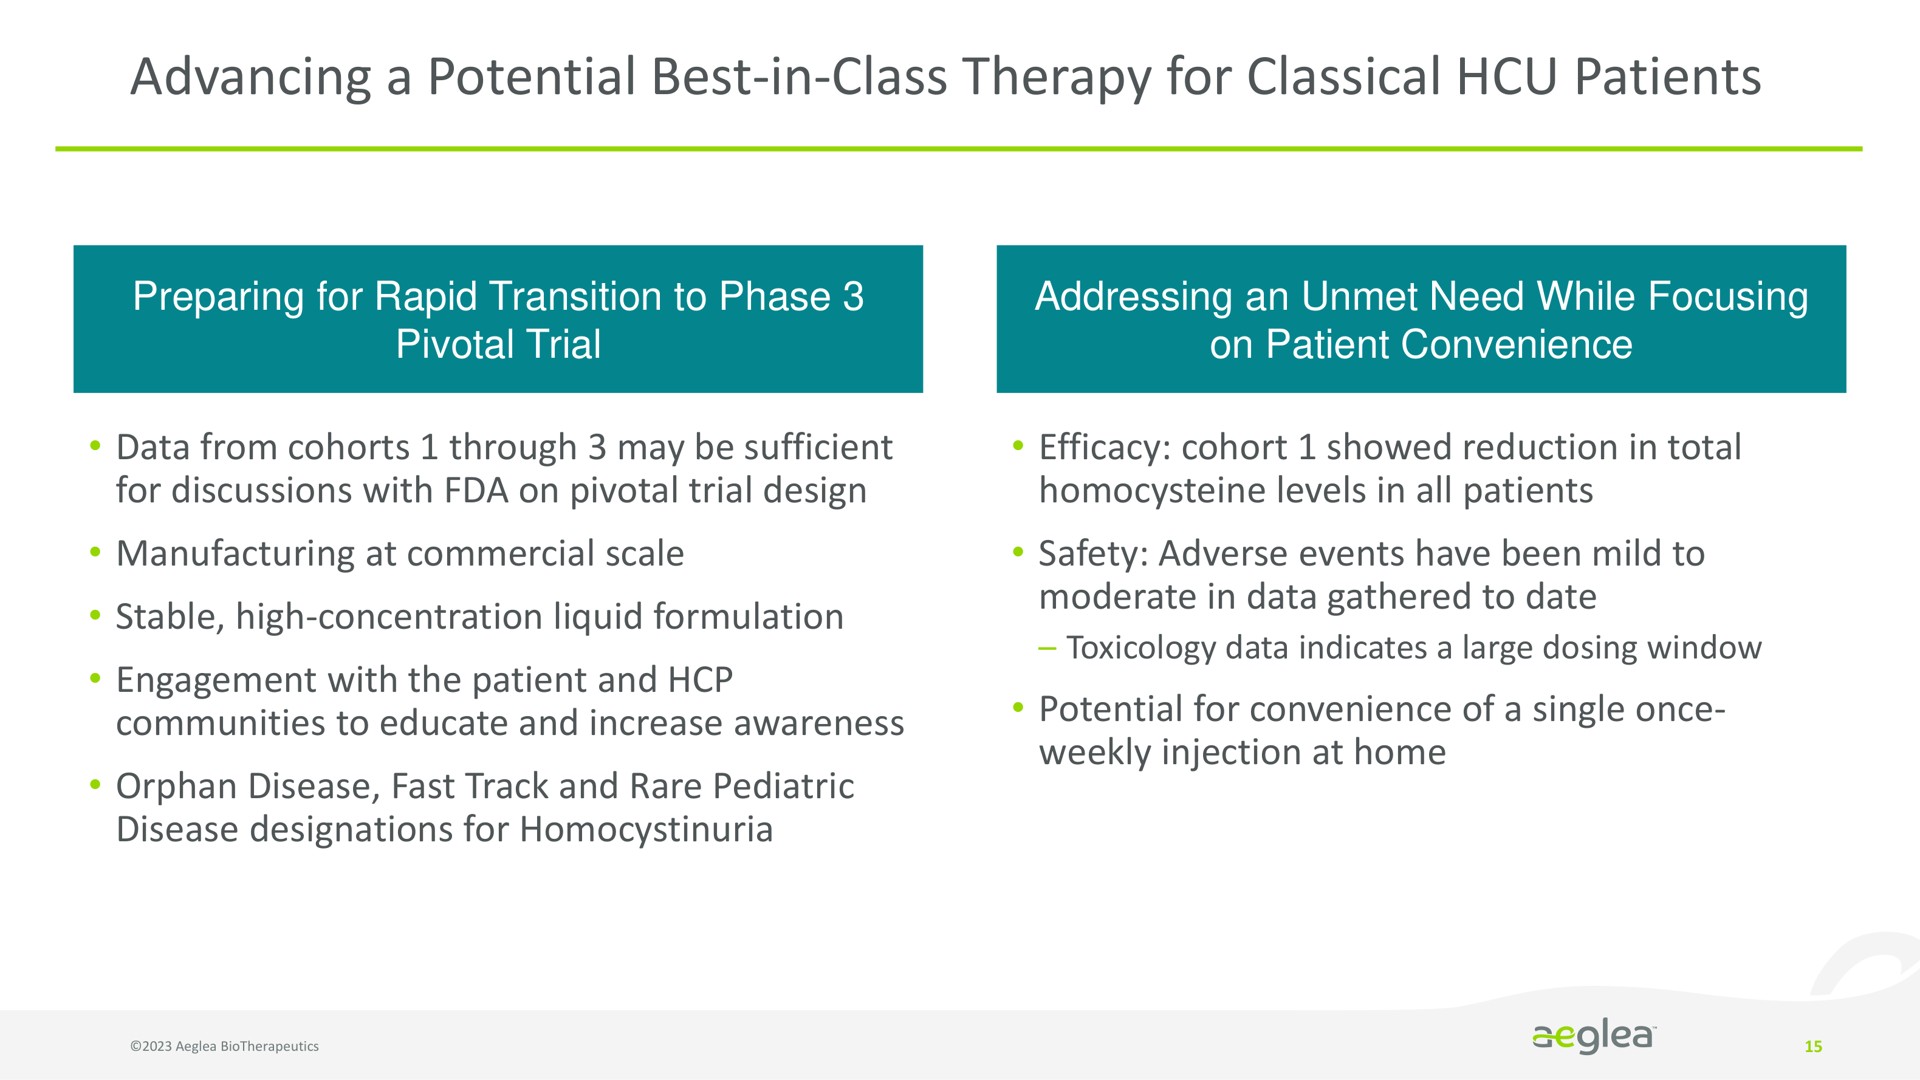 advancing a potential best in class therapy for classical patients | Aeglea BioTherapeutics